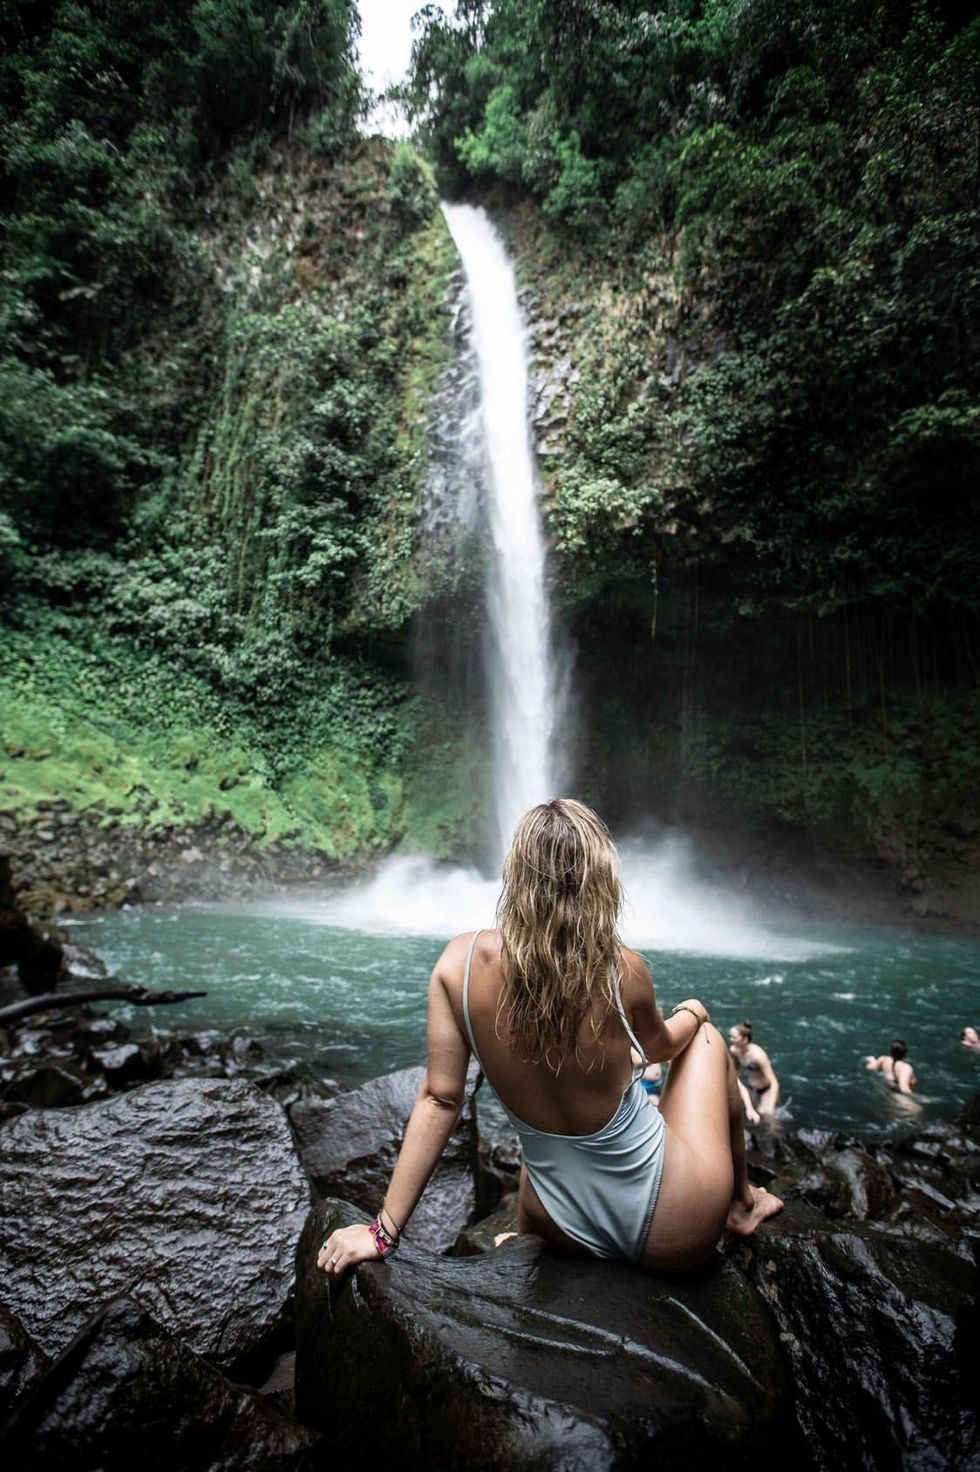 Yogis: 3 destinations to put on Your 2020 Bucket List